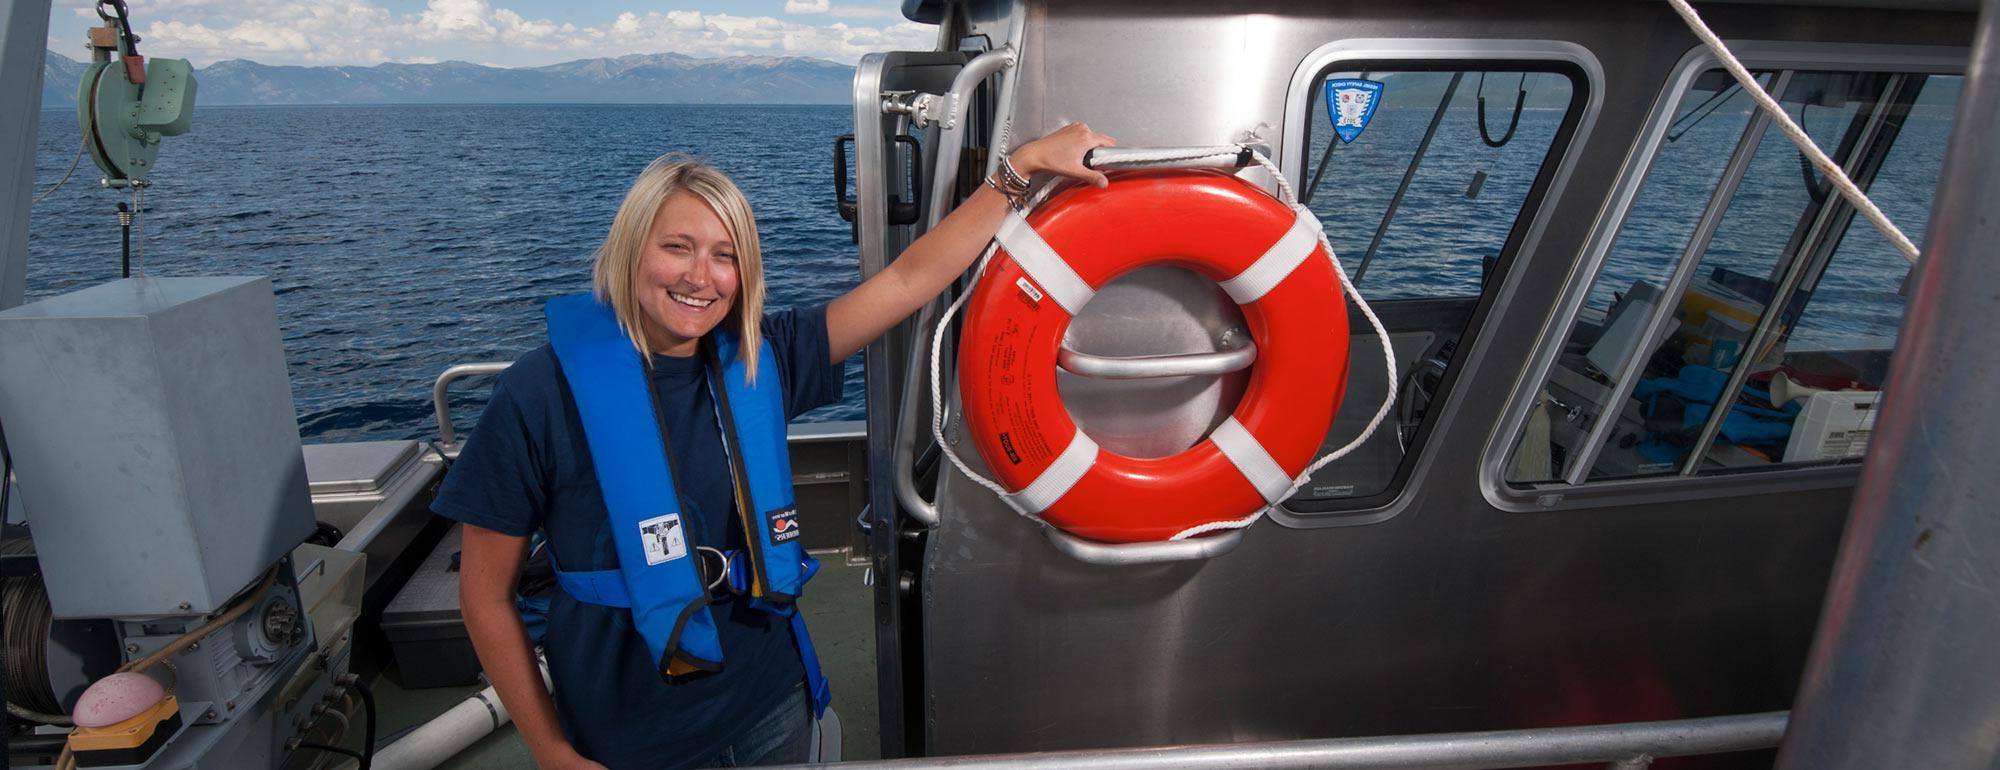 A female researcher poses on a research vessel on Lake Tahoe